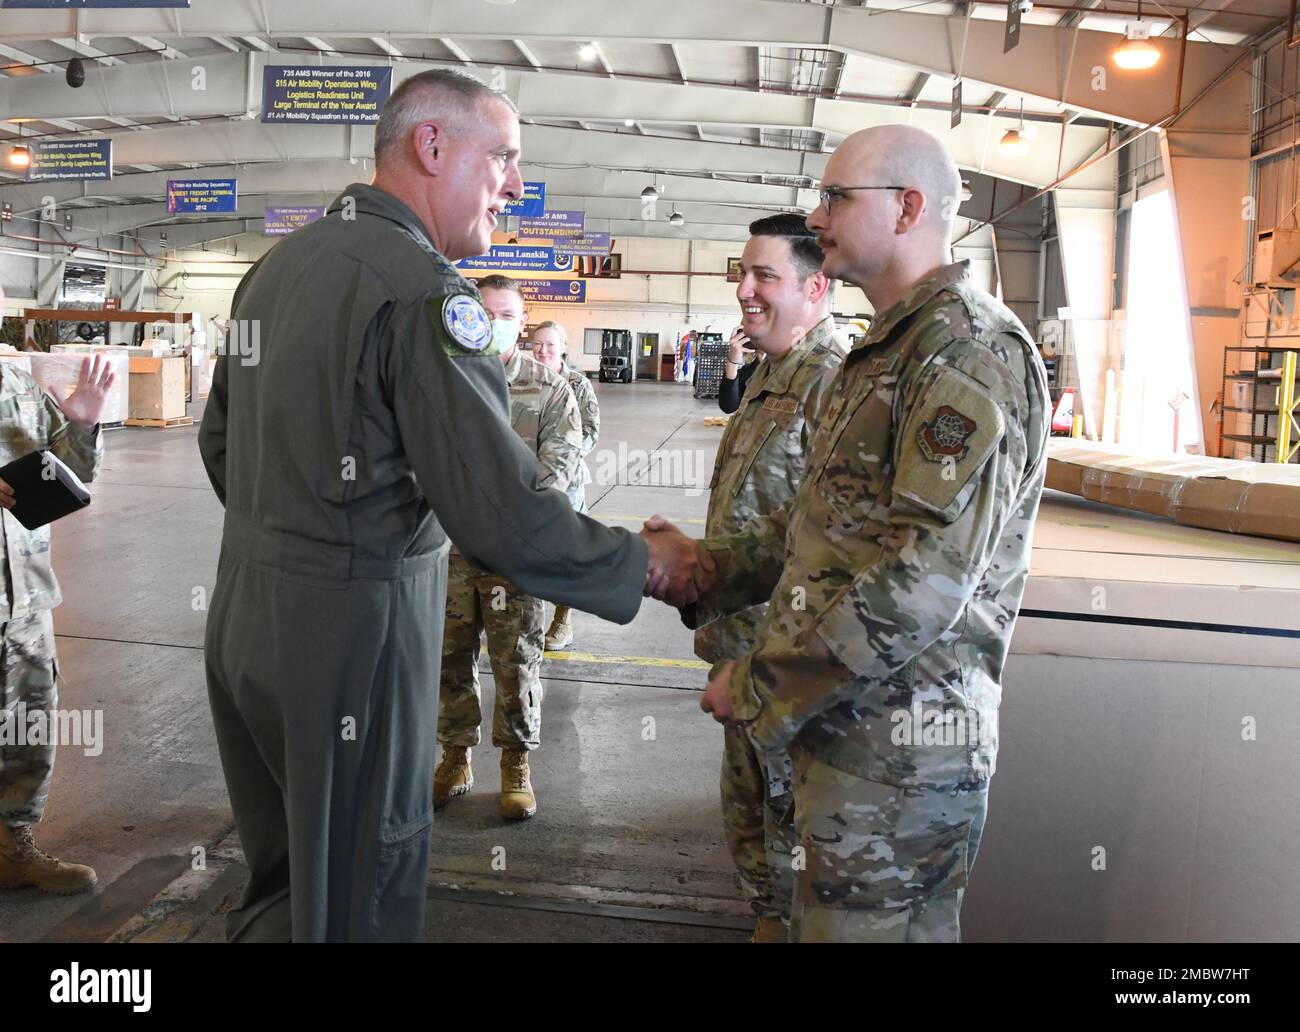 DVIDS - Images - Air Mobility Command commander Gen. Mike Minihan visits  Laughlin AFB [Image 4 of 9]